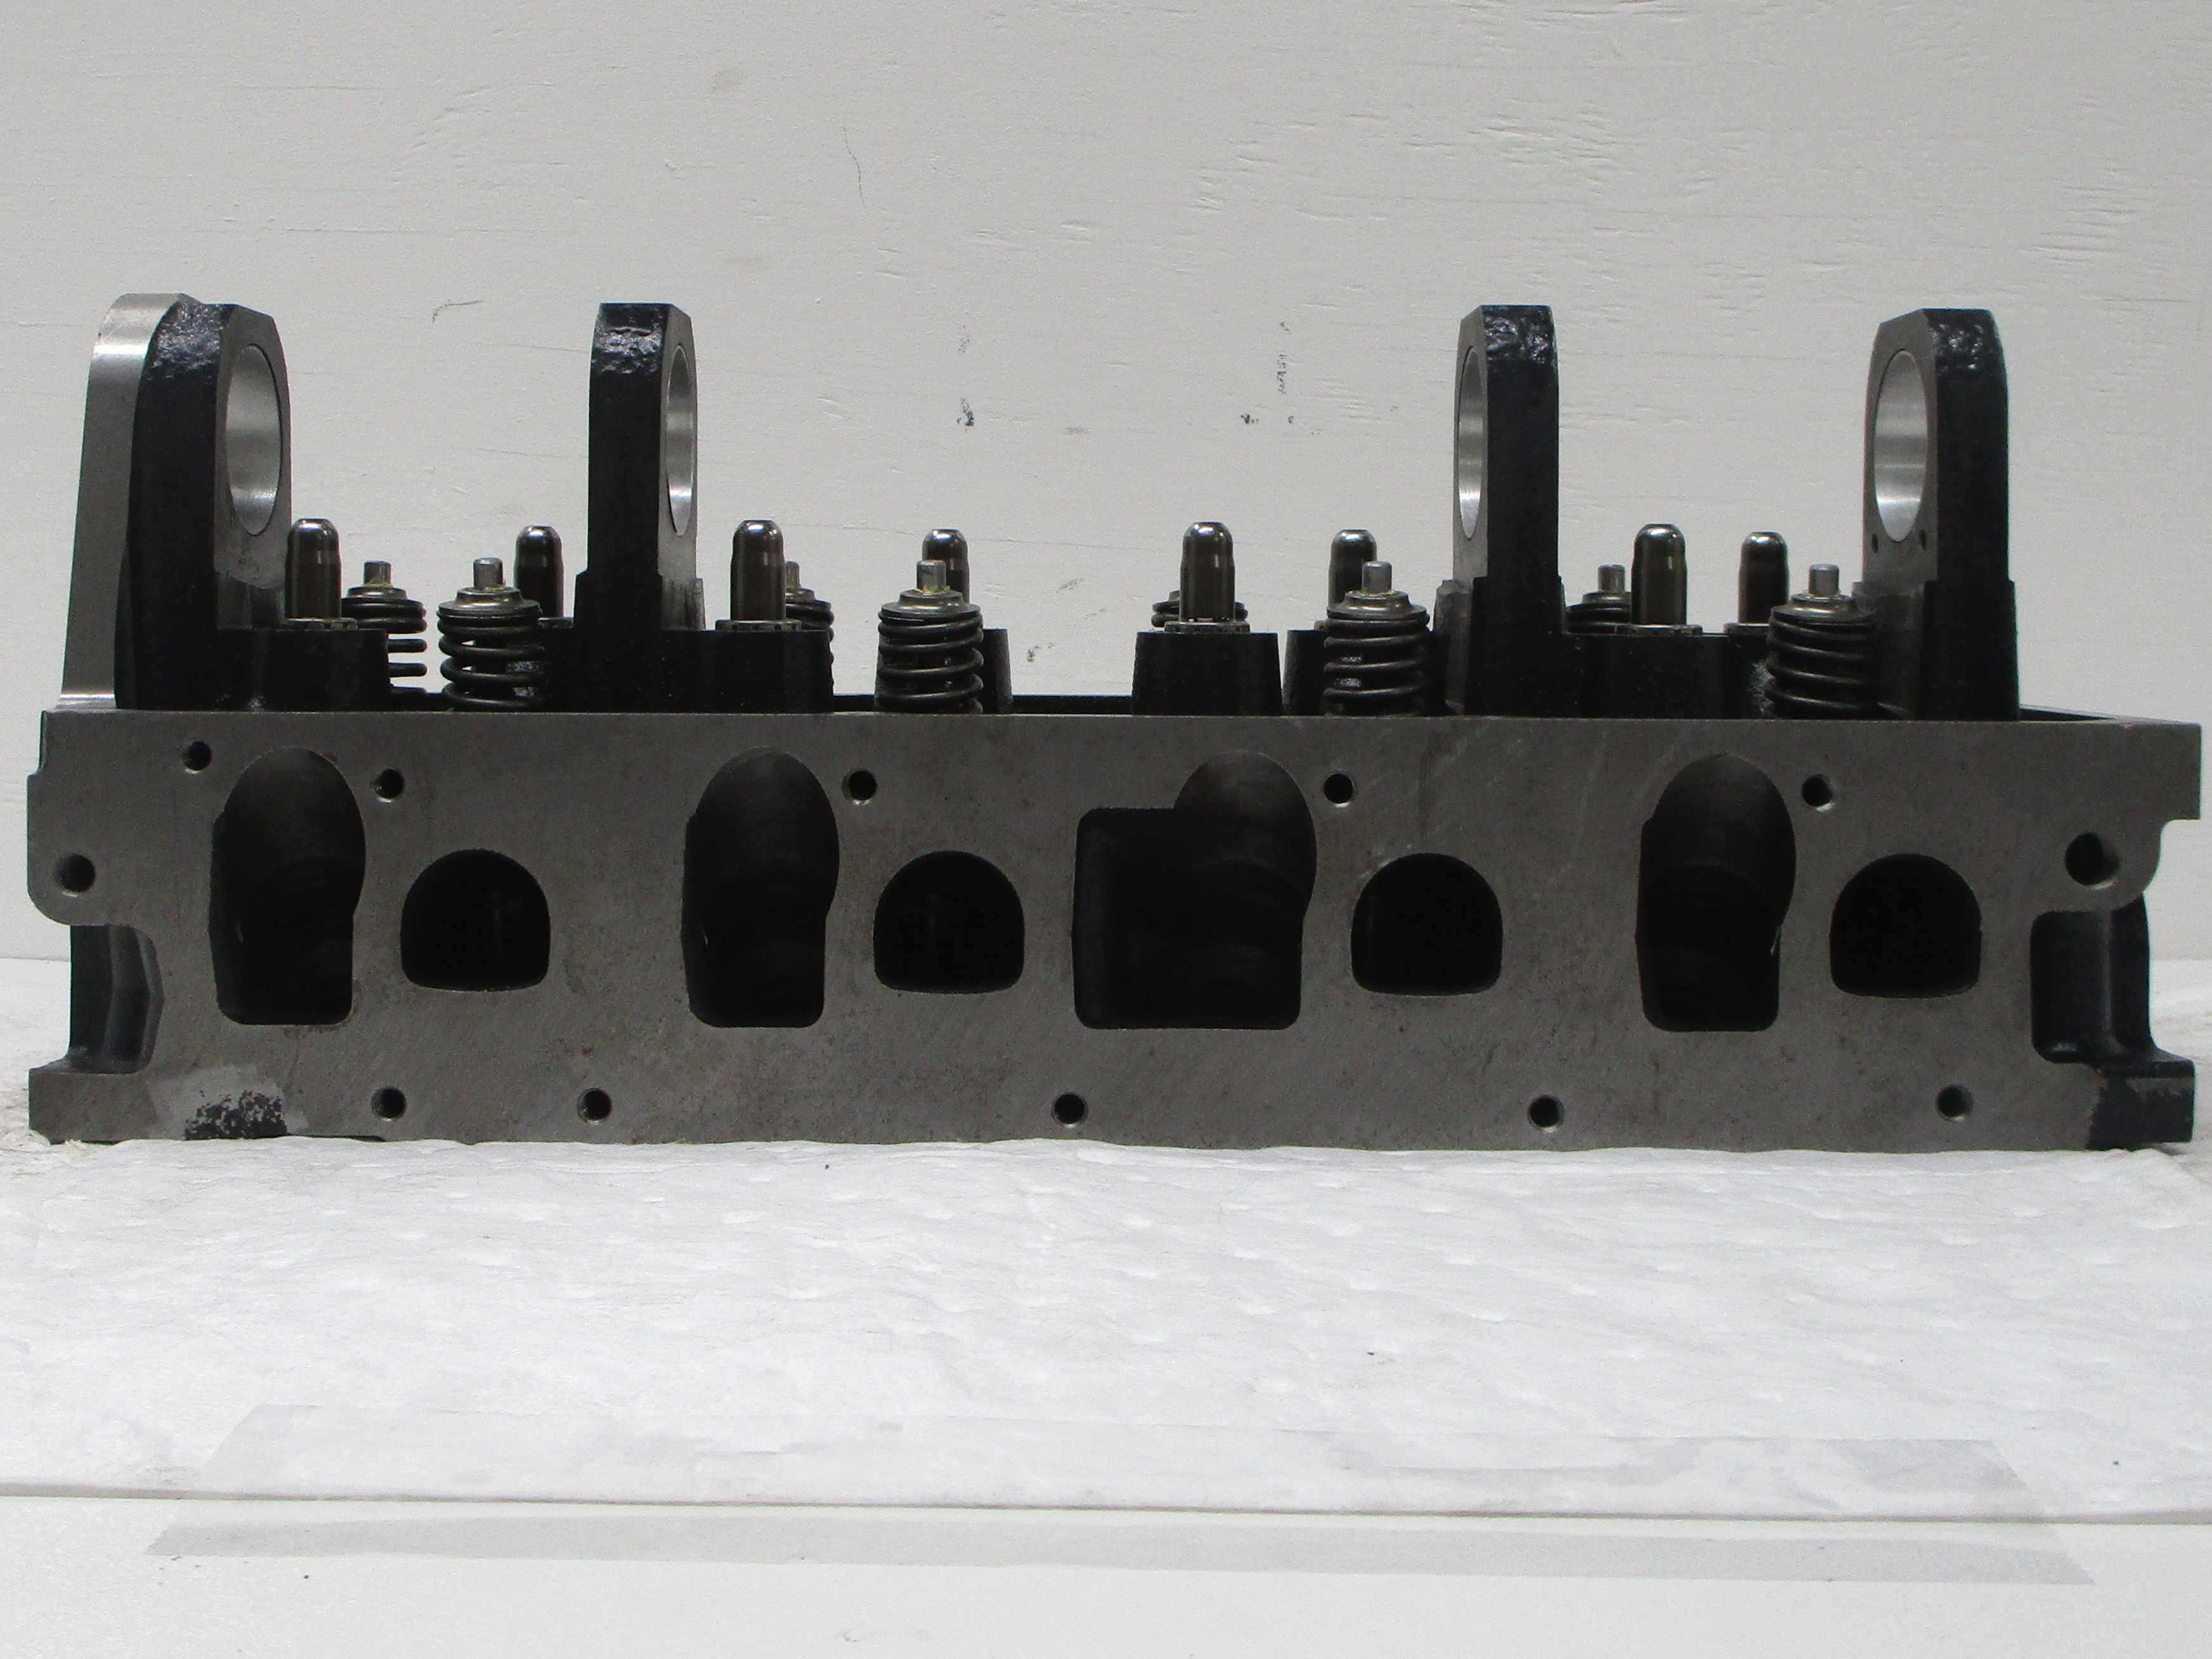 1989-1998 Ford Ranger 2.3L 4Cyl Reconditioned Cylinder Head W/Cams - Casting#M11632326 ($100 Core Charge)